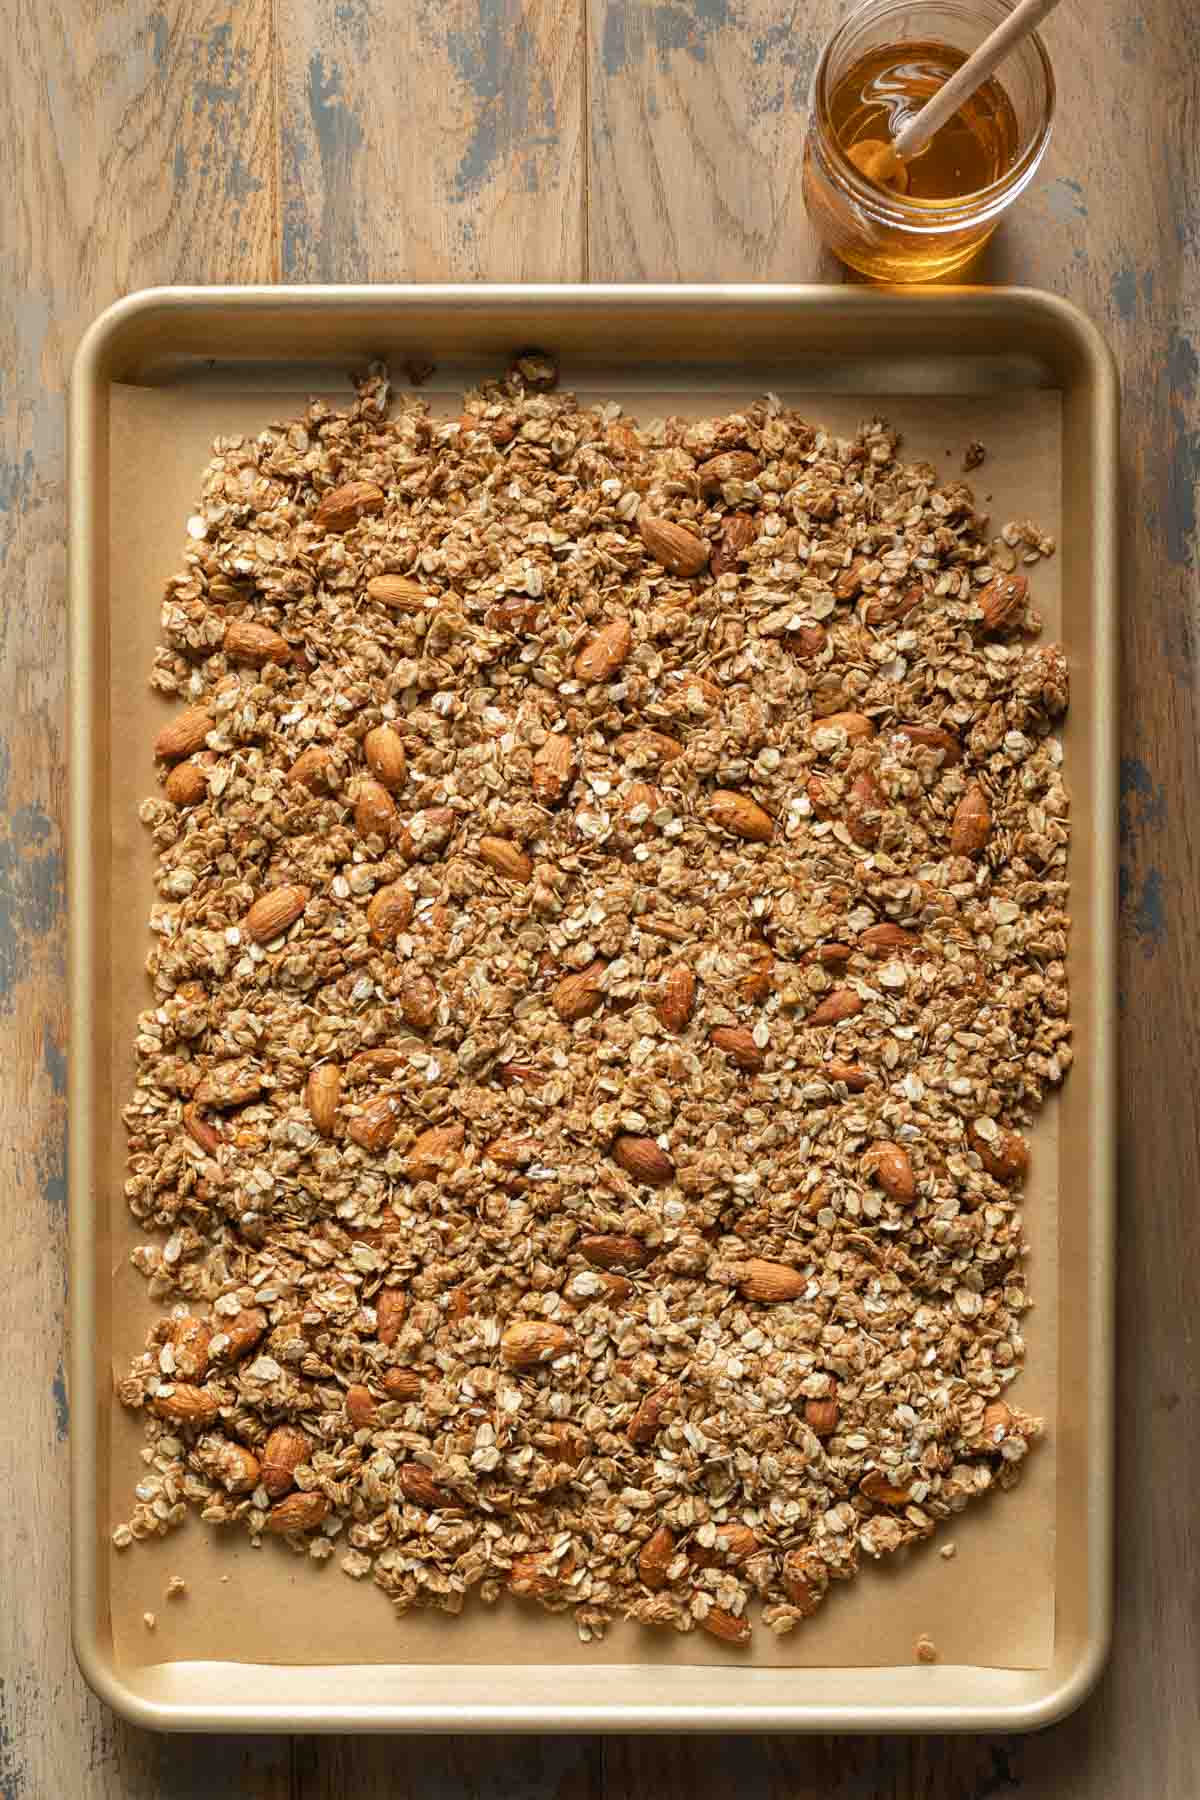 Granola mixture spread out on a parchment paper lined baking sheet.